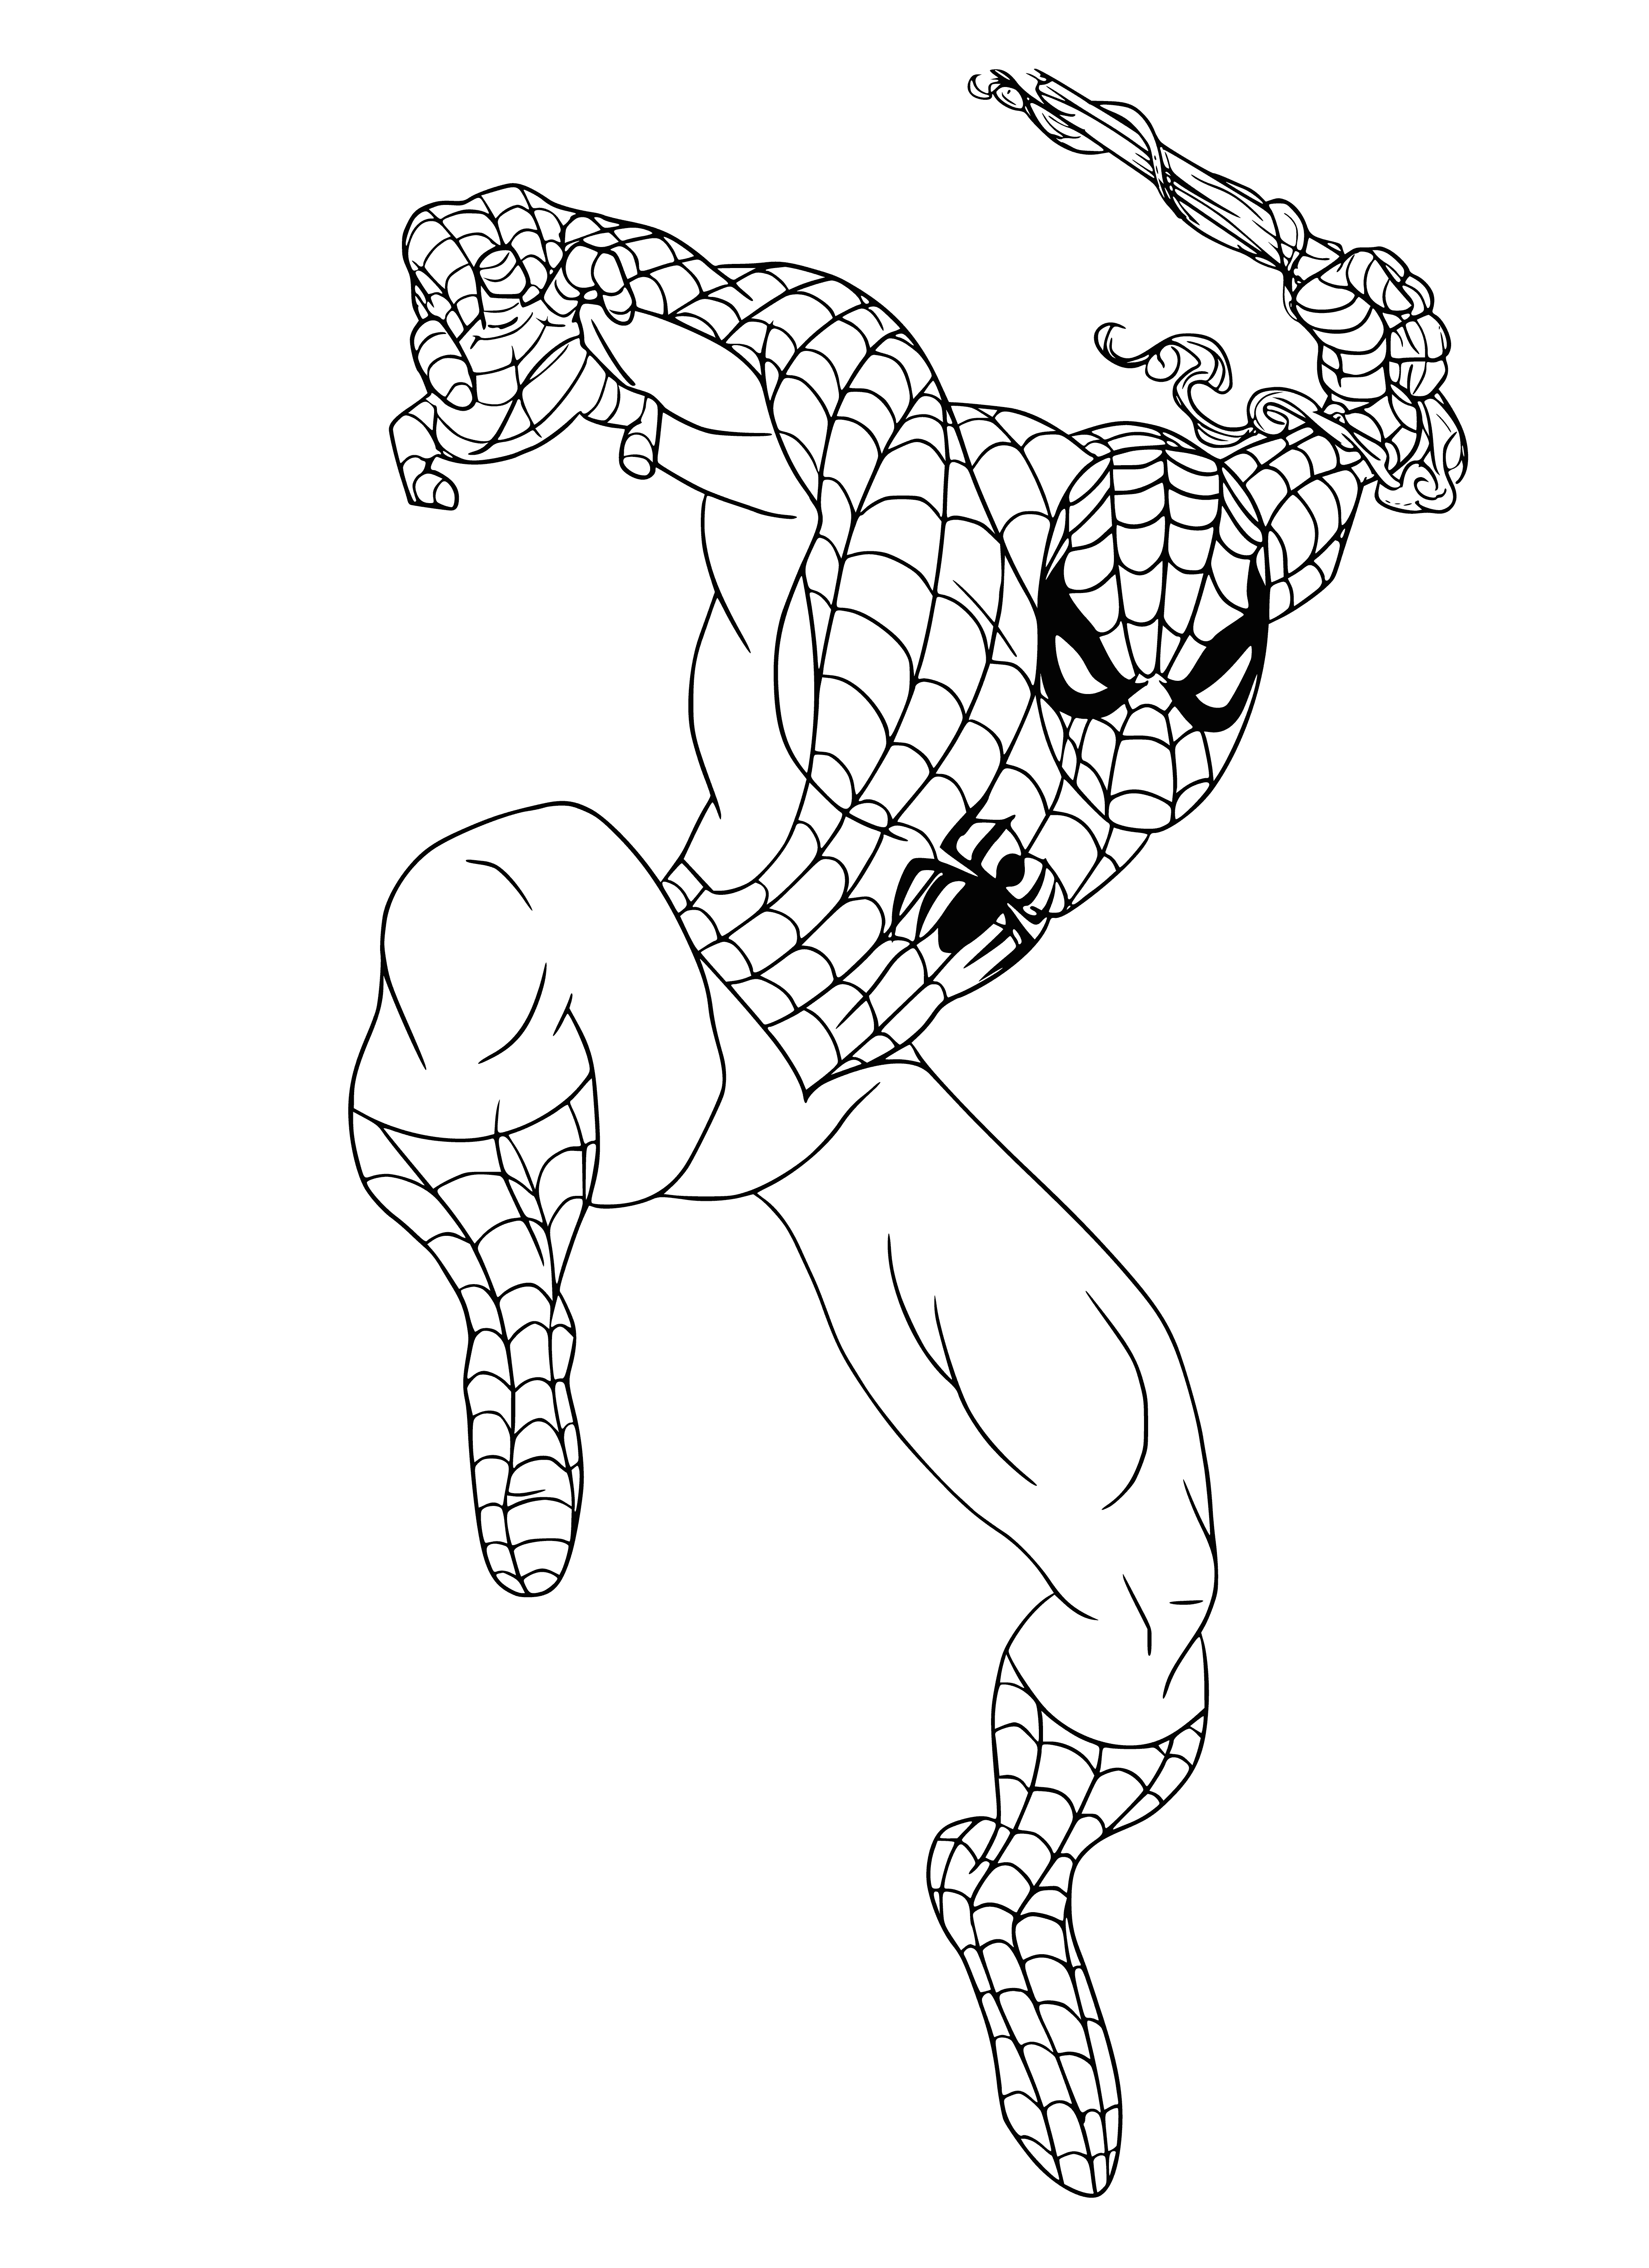 coloring page: Man in spider suit hangs from building, looking down at group below.